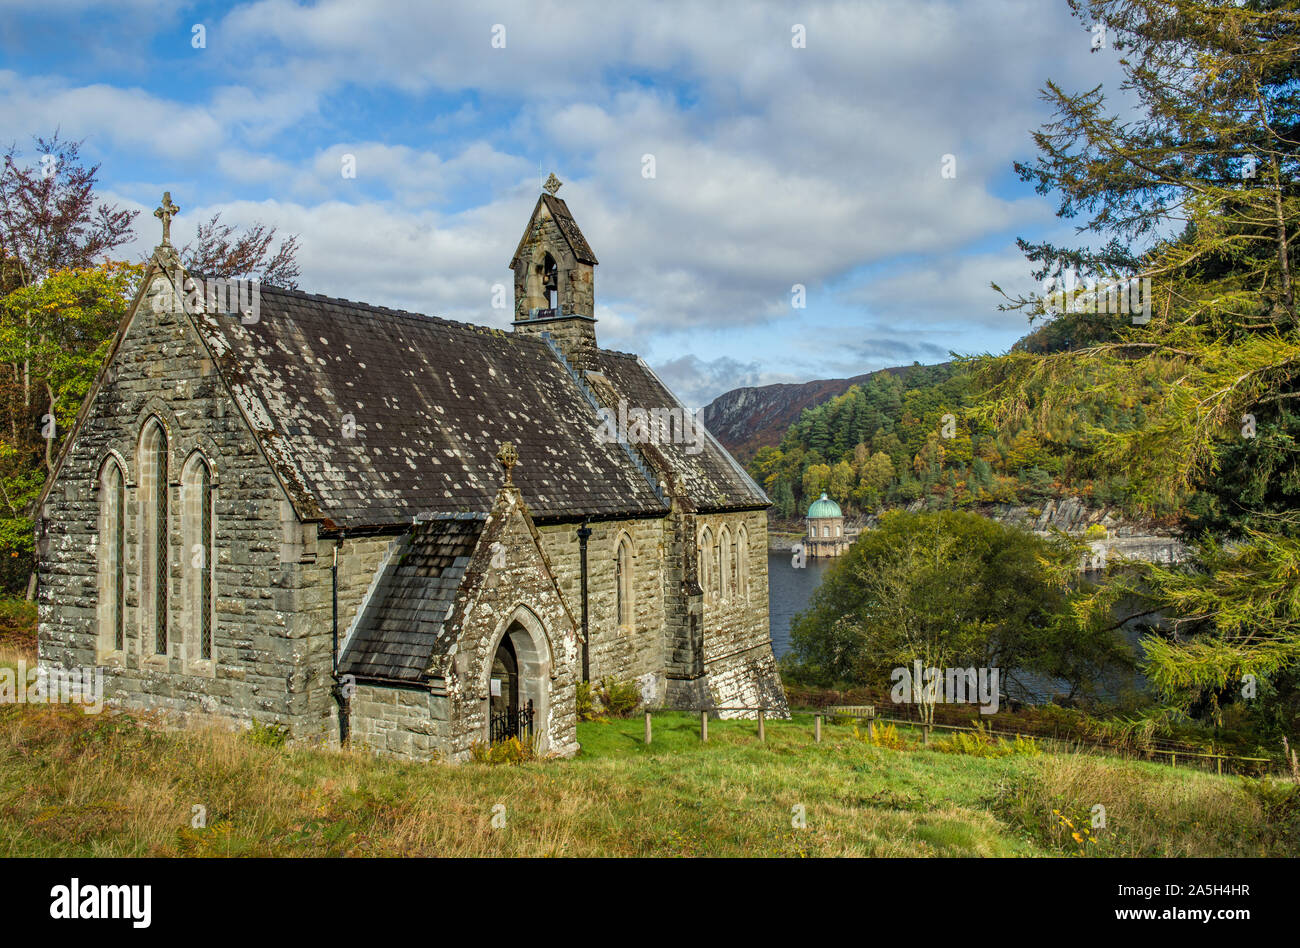 Nantgwyllt Church above Caban Coch Reservoir in the Elan Valley Powys Mid Wales. The church was moved here after its location was due to be flooded. Stock Photo